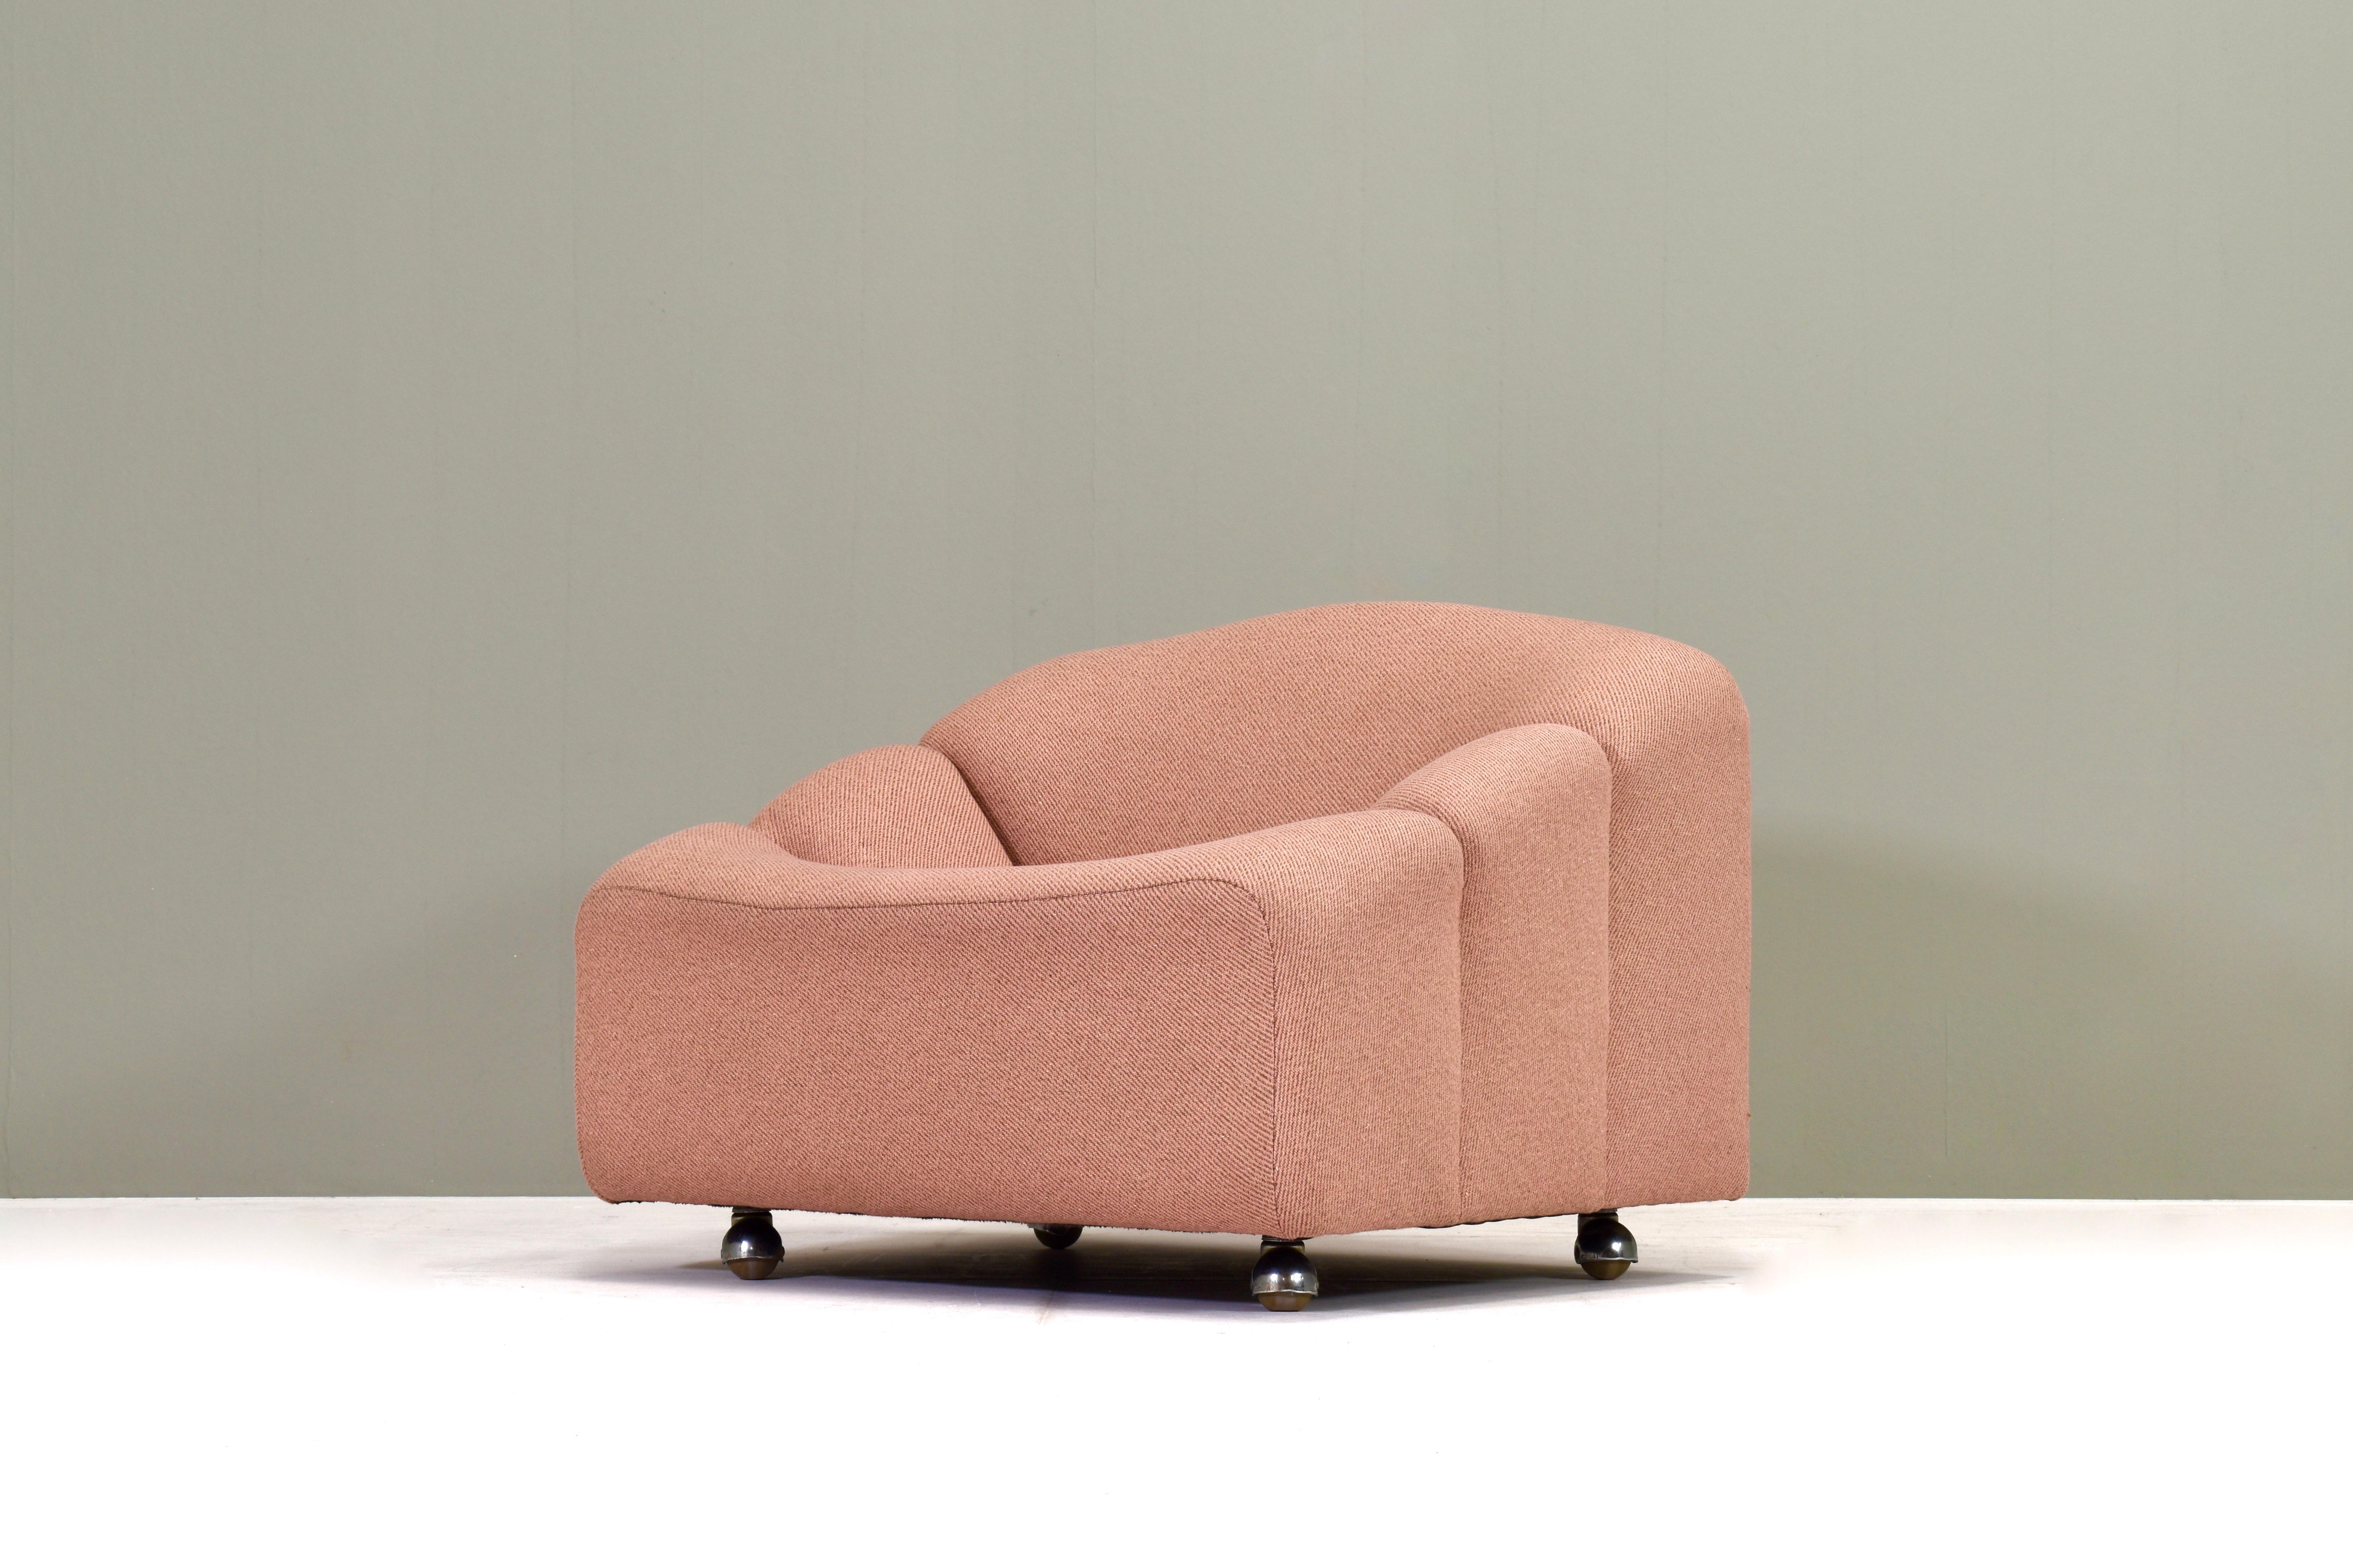 Mid-Century Modern ABCD Armchair by Pierre Paulin for ARTIFORT Original Fabric, Netherlands - 1968